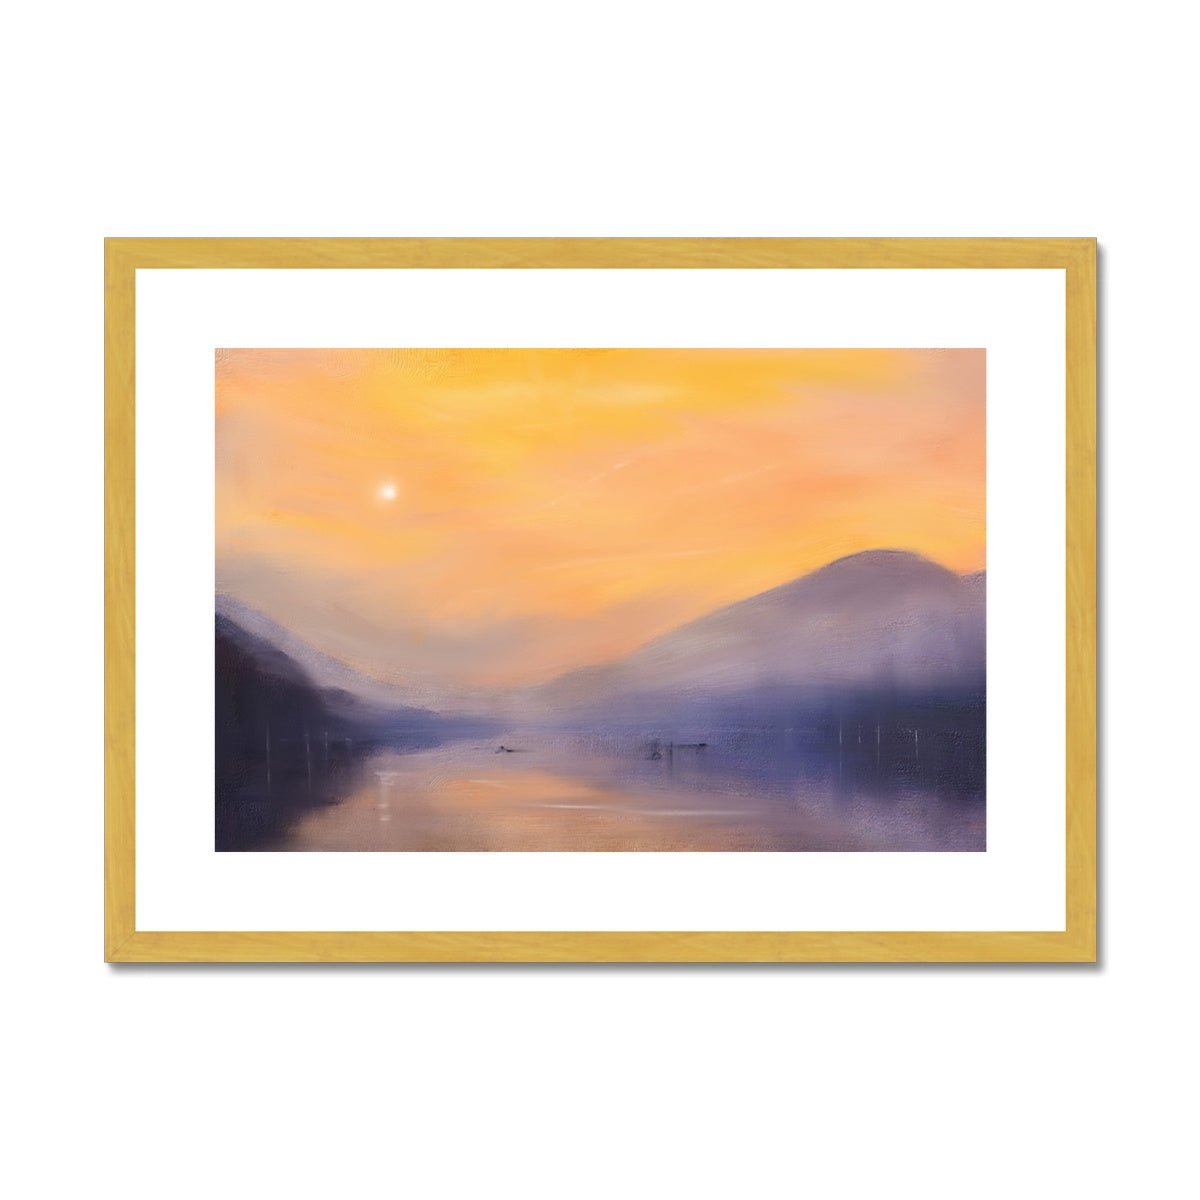 Loch Eck Dusk Painting | Antique Framed & Mounted Prints From Scotland-Antique Framed & Mounted Prints-Scottish Lochs & Mountains Art Gallery-A2 Landscape-Gold Frame-Paintings, Prints, Homeware, Art Gifts From Scotland By Scottish Artist Kevin Hunter